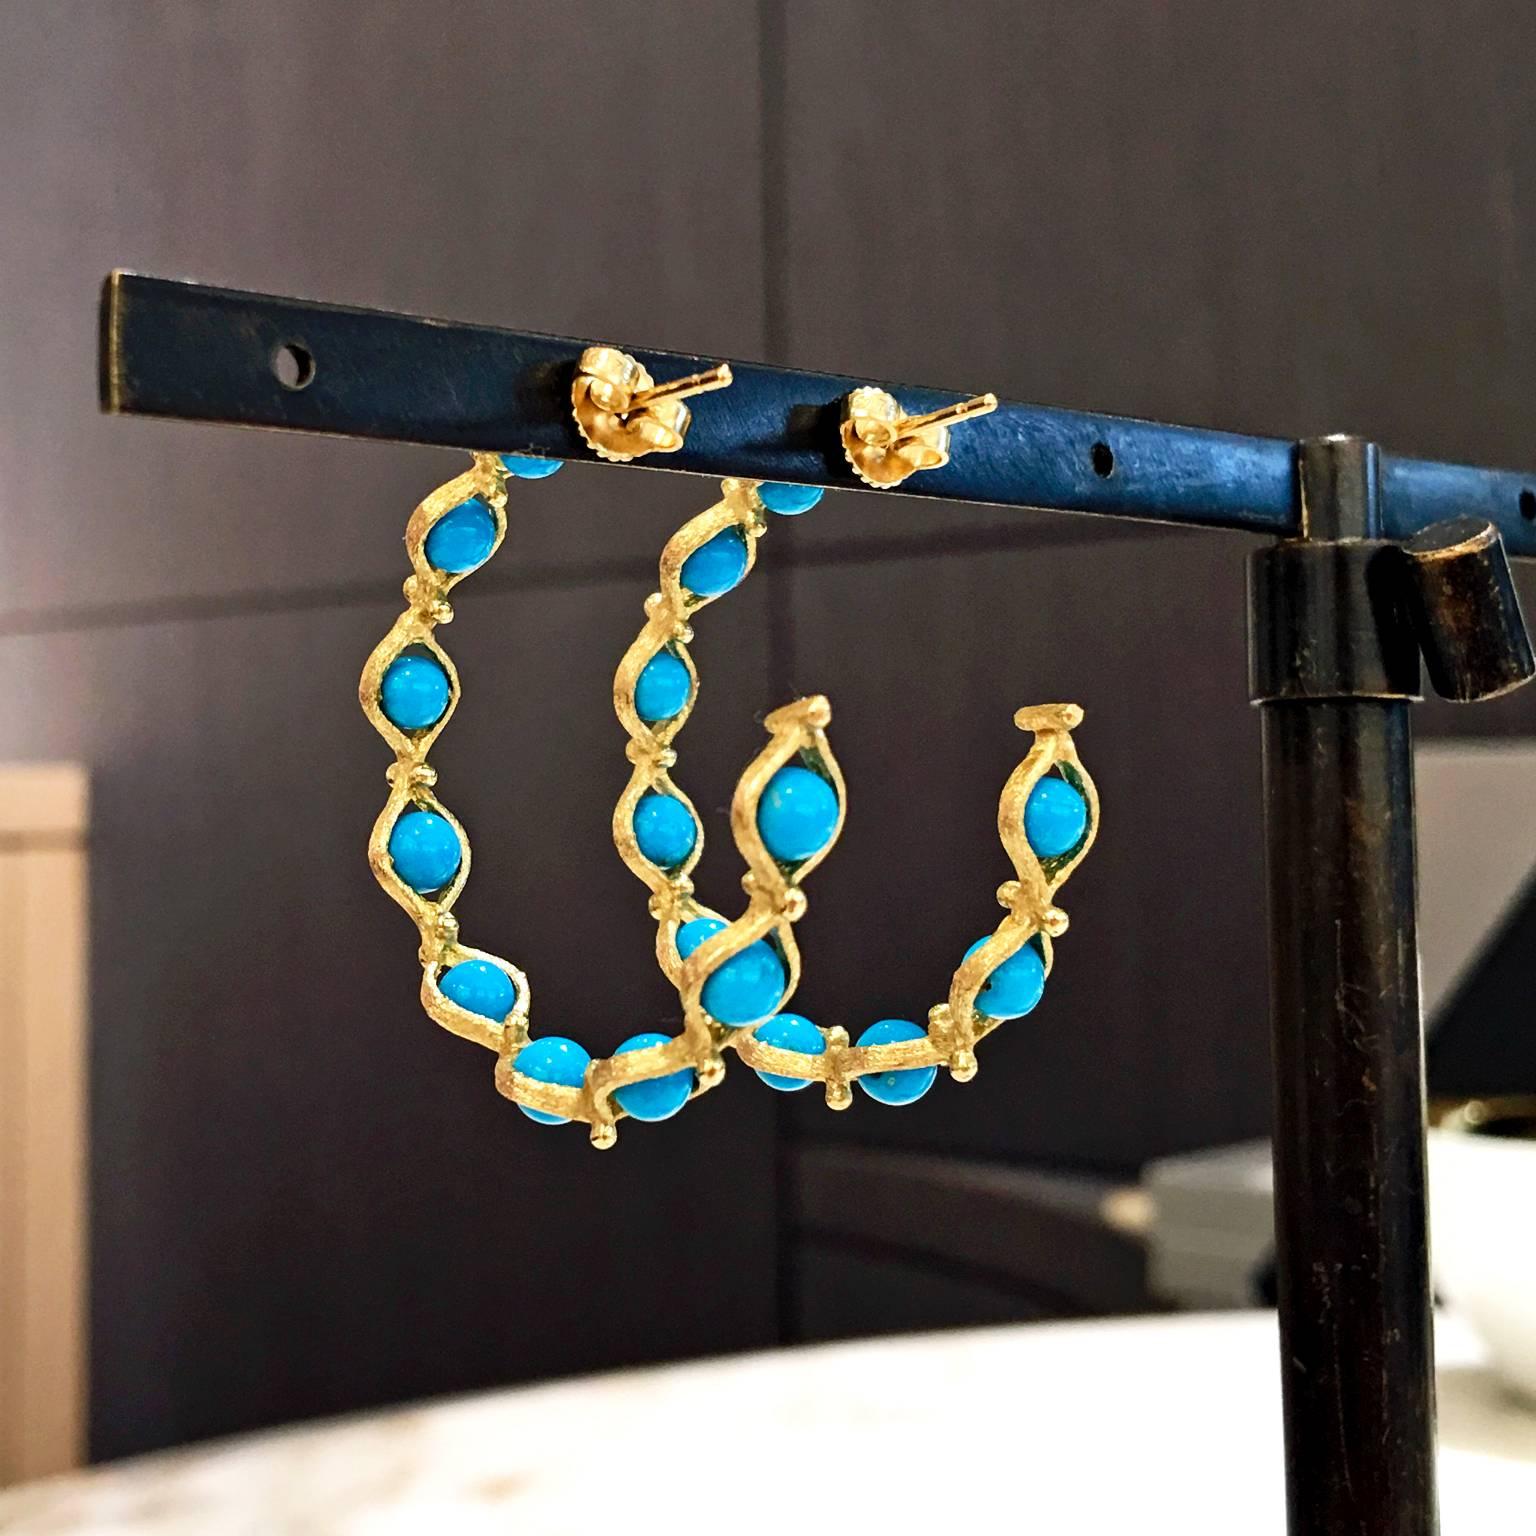 Infinity Hoop Earrings handcrafted by Joseph Murray with his signature 18k yellow gold finish wrapped around 18 turquoise sphere rolling beads, and accented with gold granulation. 